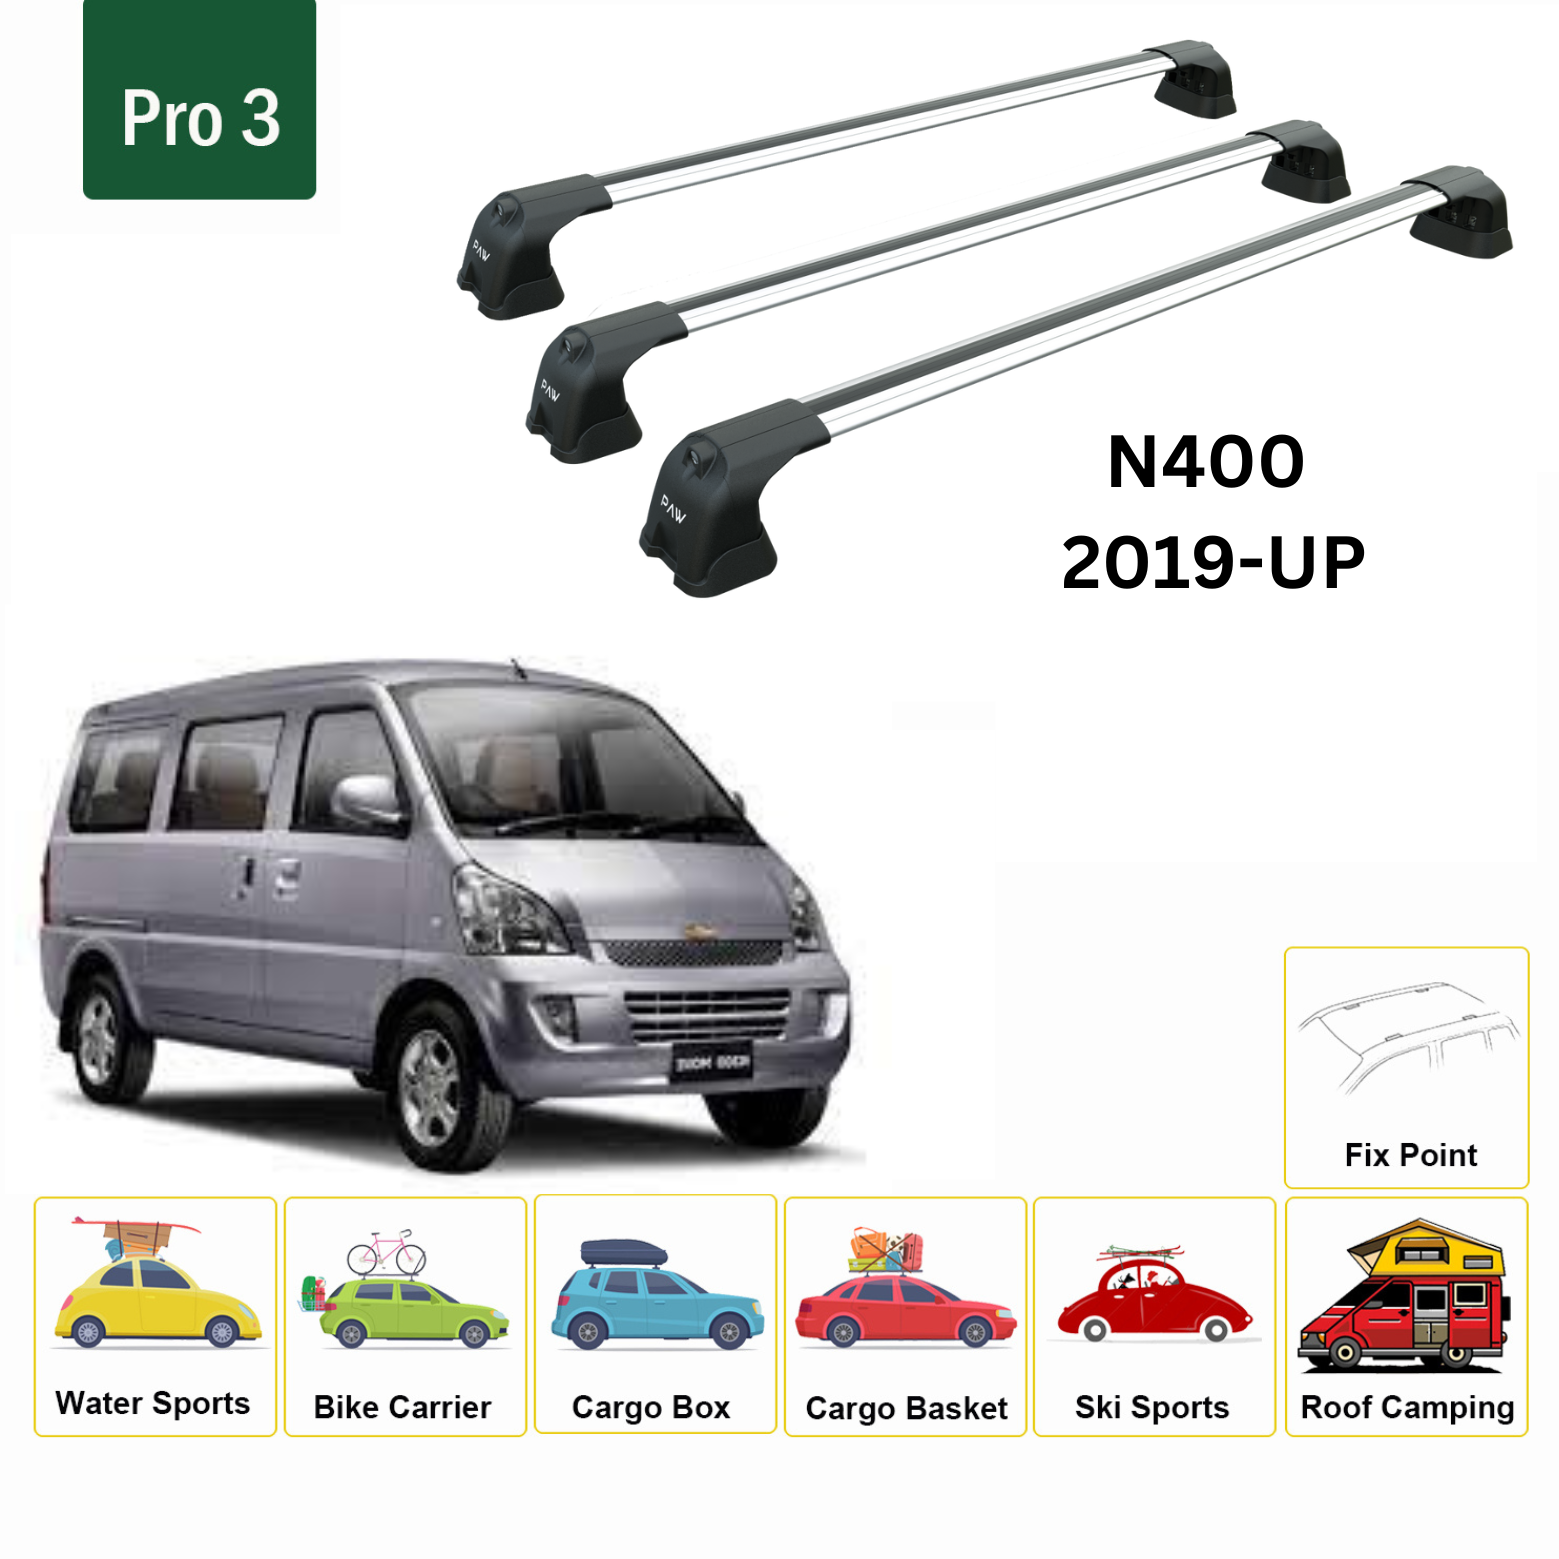 For Chevrolet N300 2012-Up Roof Rack Cross Bars Metal Bracket Fix Point 3 Qty. Alu Silver - 0